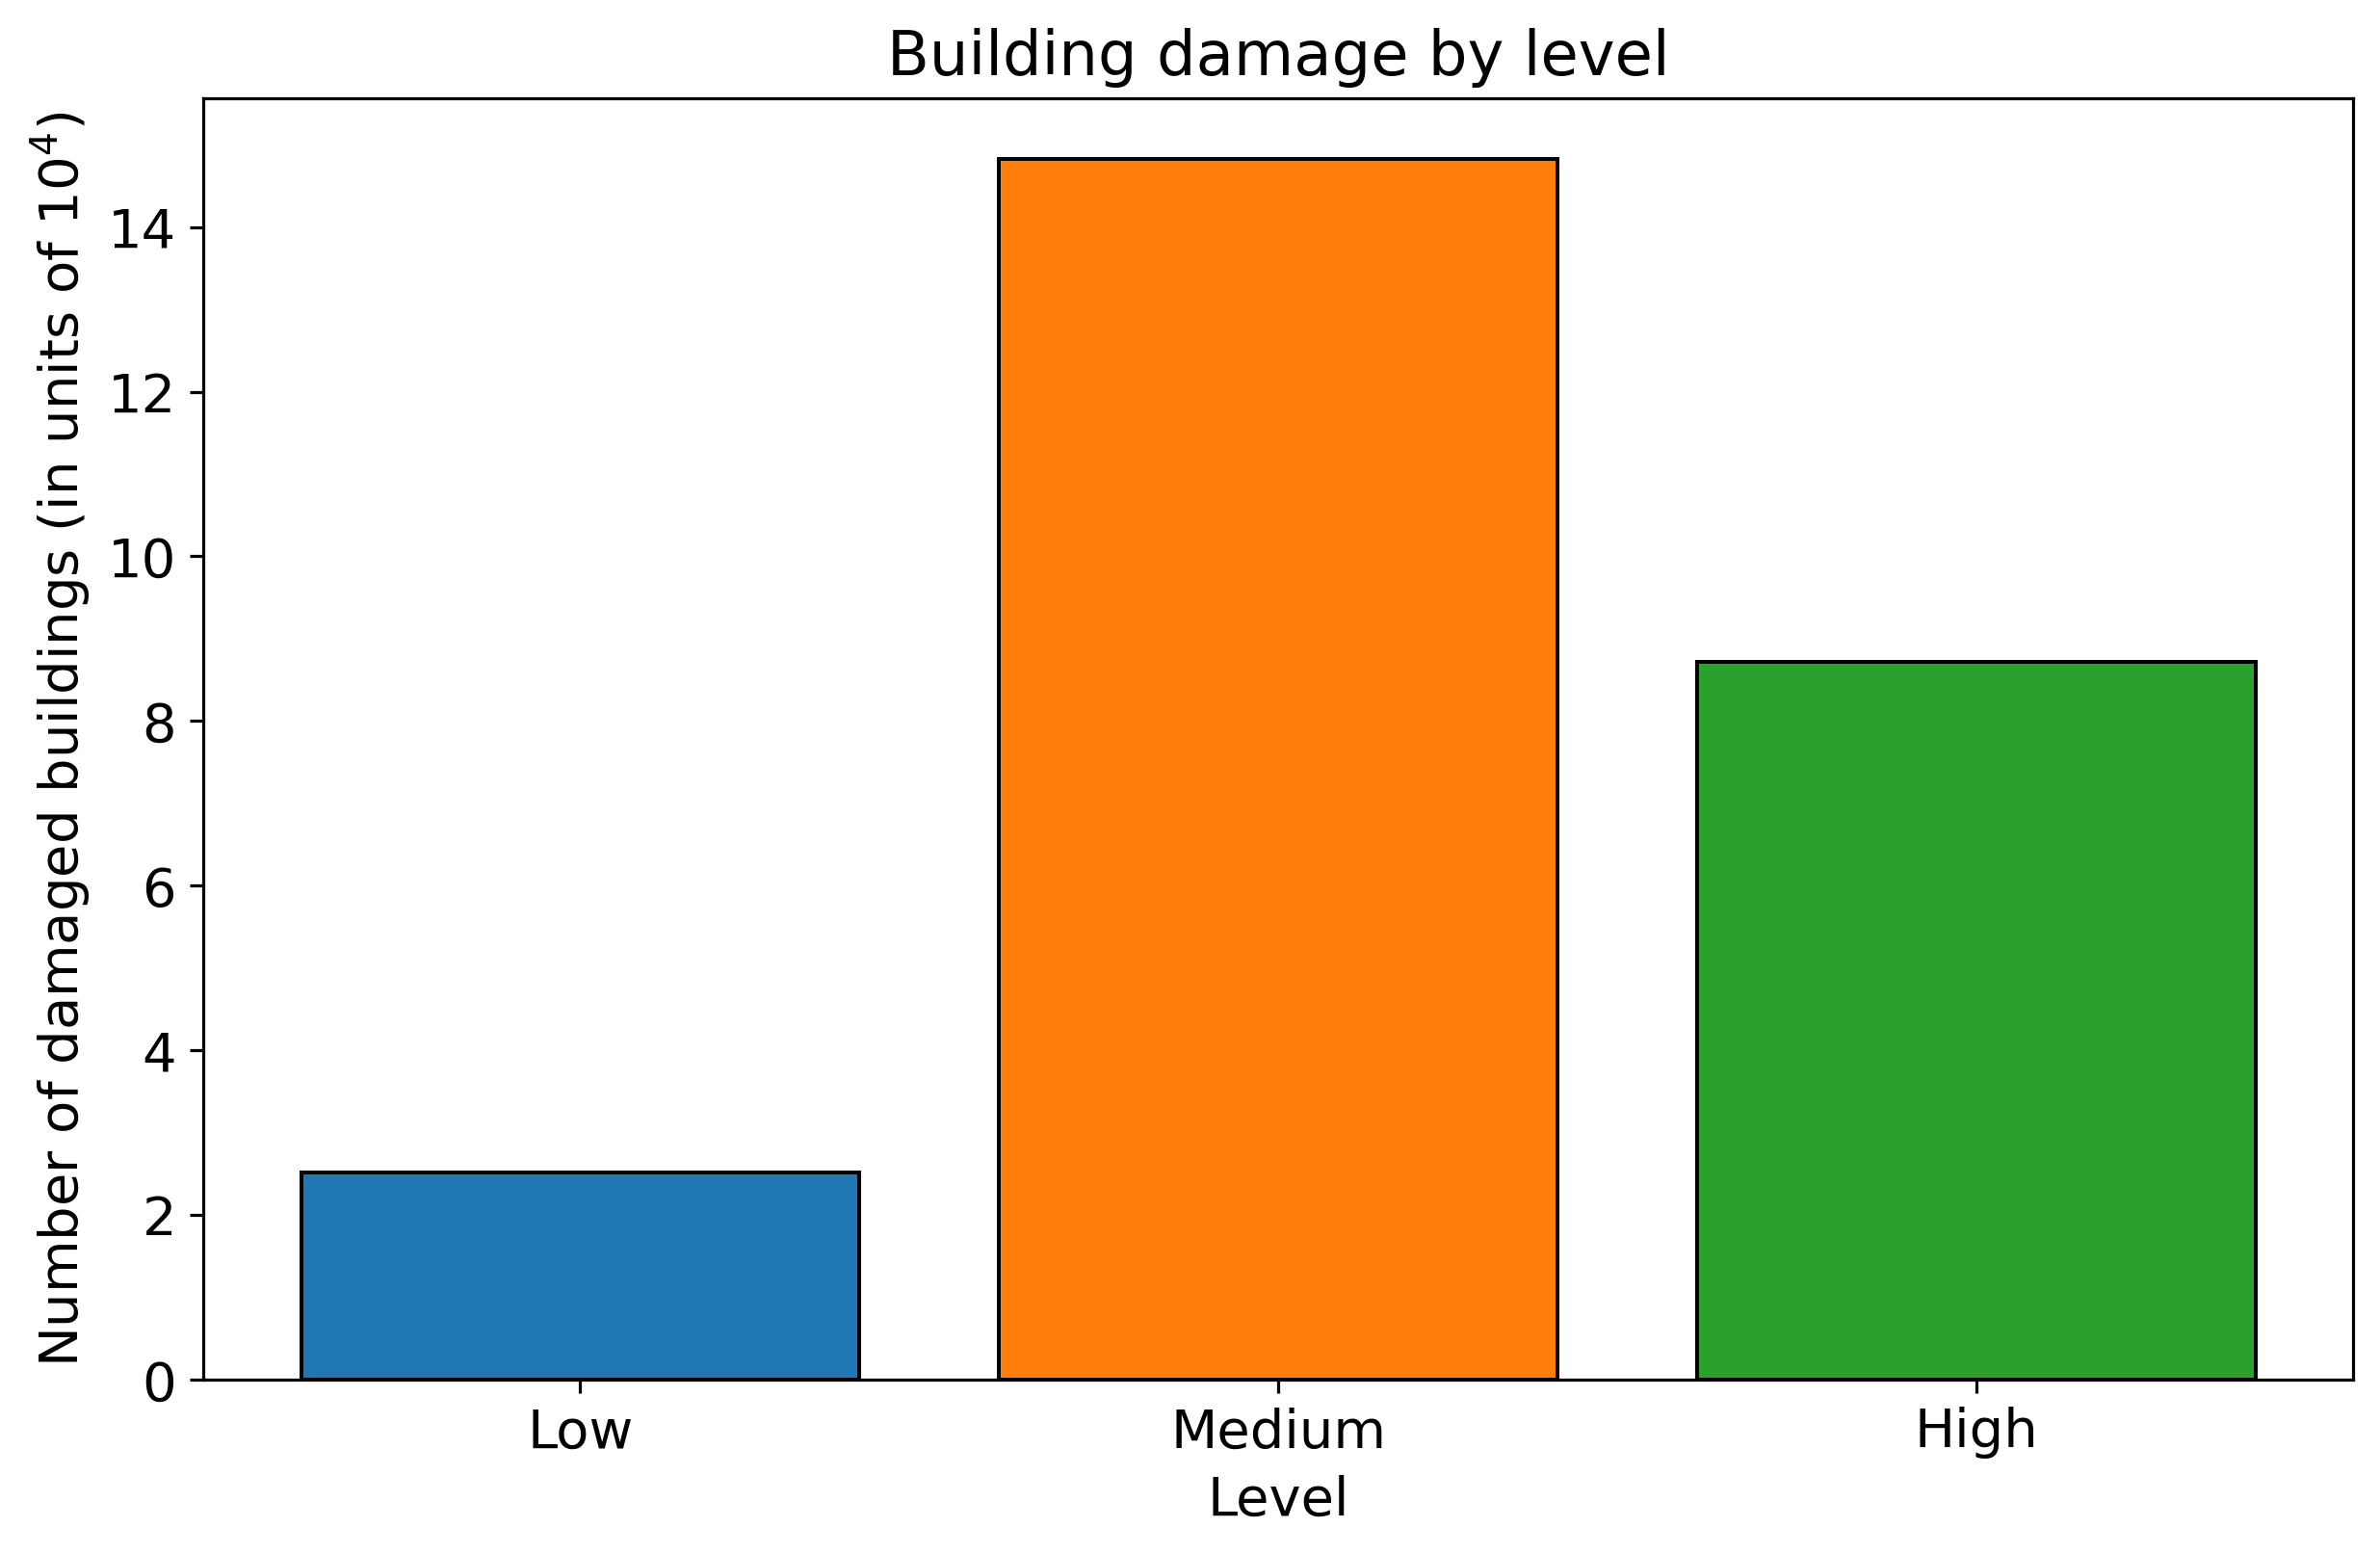 Building damage by level